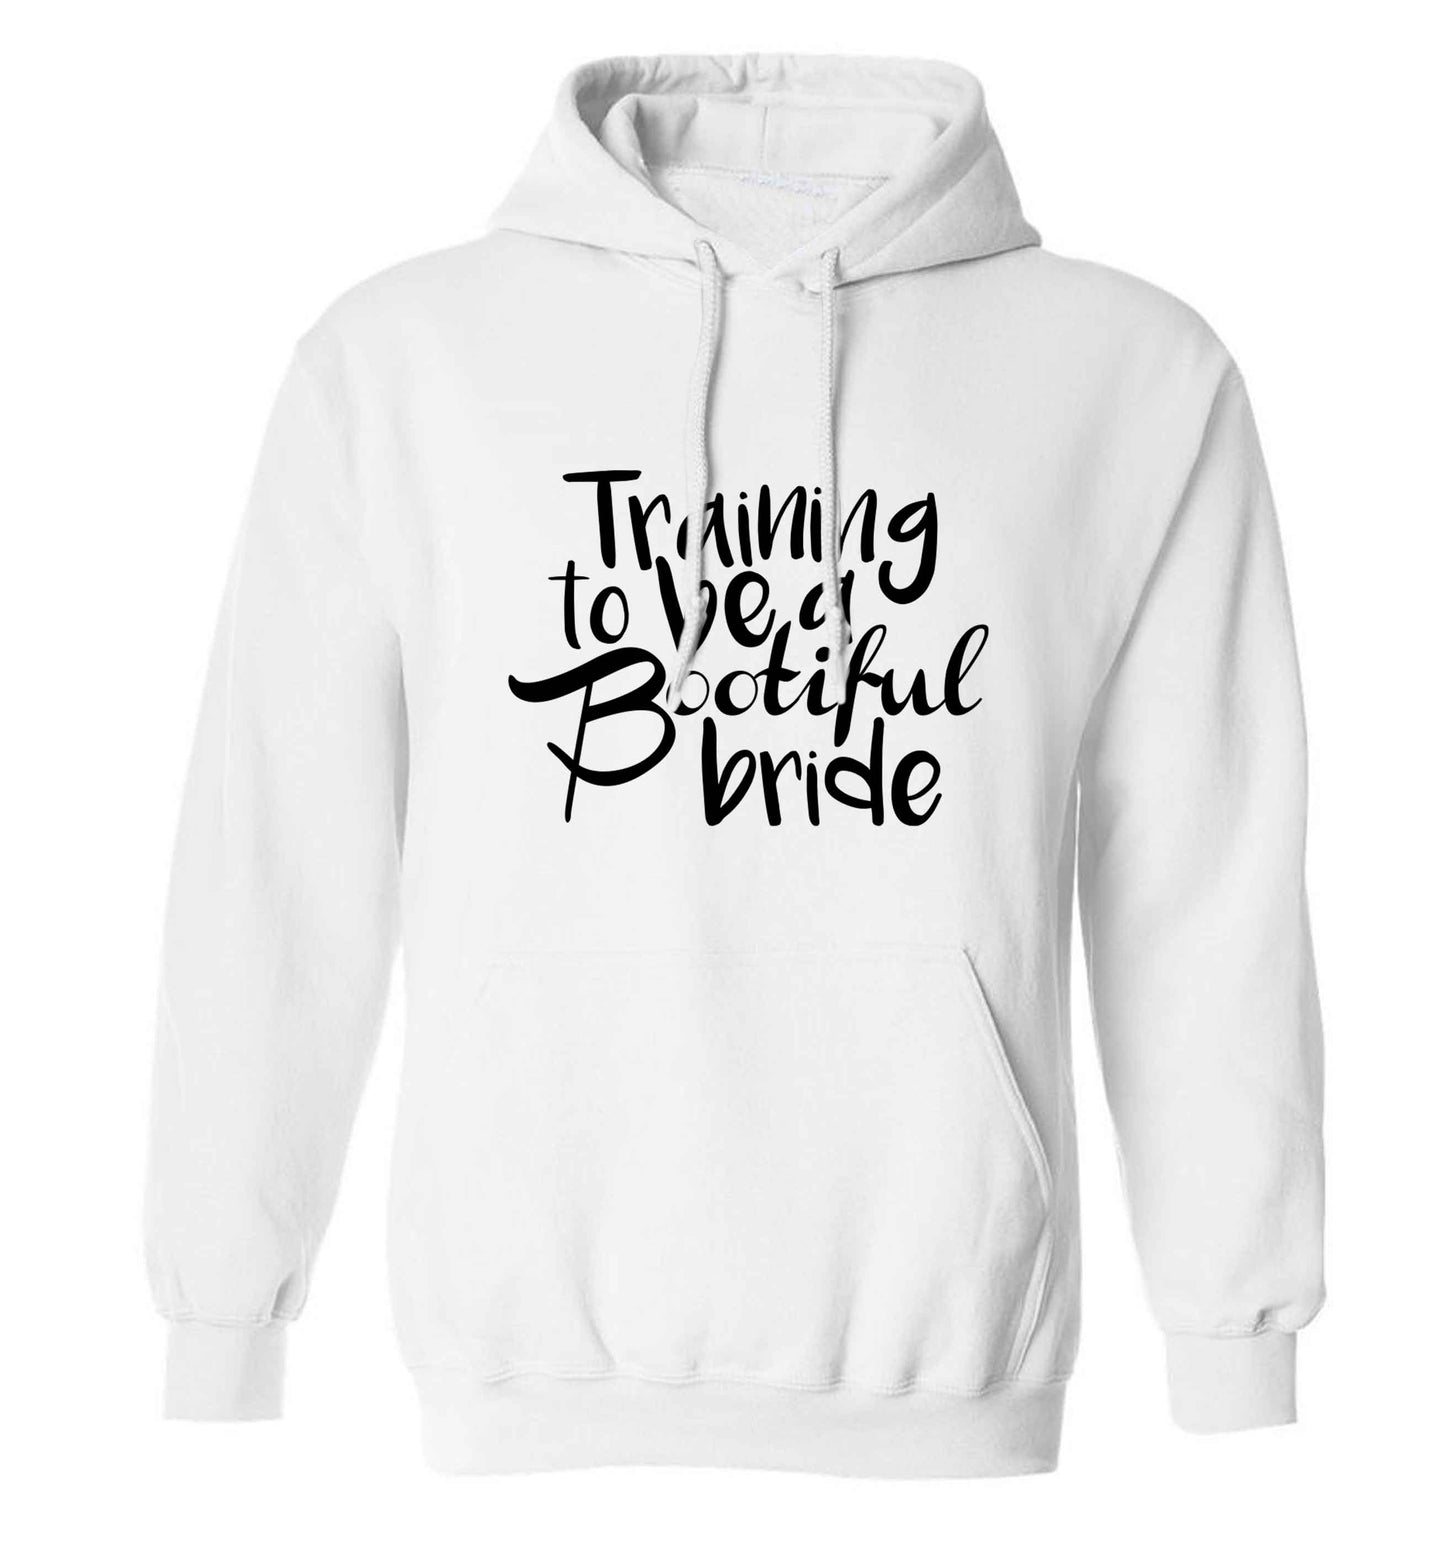 Get motivated and get fit for your big day! Our workout quotes and designs will get you ready to sweat! Perfect for any bride, groom or bridesmaid to be!  adults unisex white hoodie 2XL